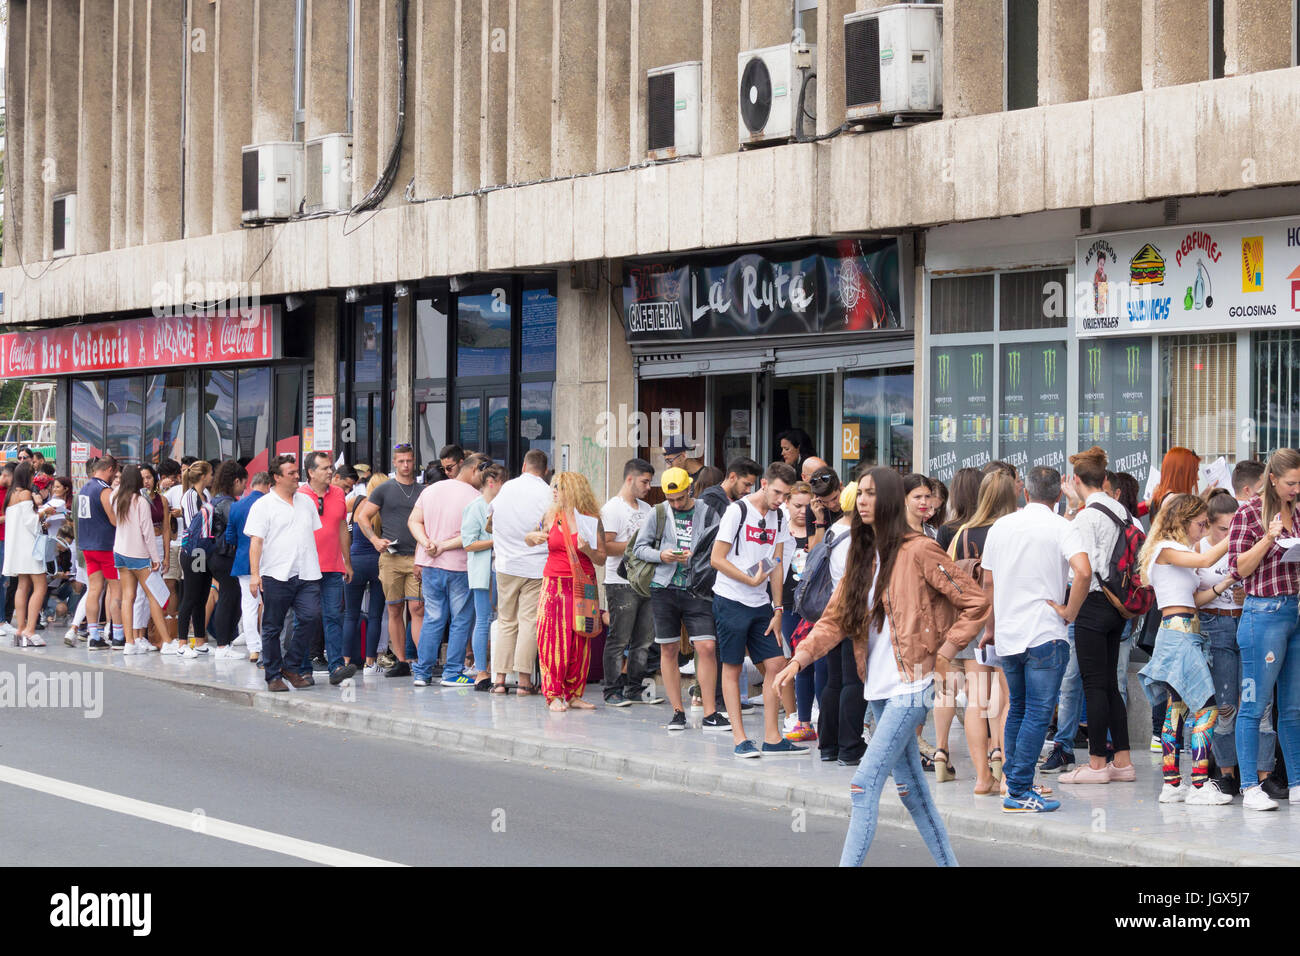 Las Palmas, Gran Canaria, Canary Islands, Spain. 11th July 2017. Hundreds of hopefulls queue outside city hotel in Las Palmas as audititons take place to find 'housemates' for the 18th edition of Big Brother on Spanish TV ( Gran Hermano). Credit: ALAN DAWSON/Alamy Live News Stock Photo